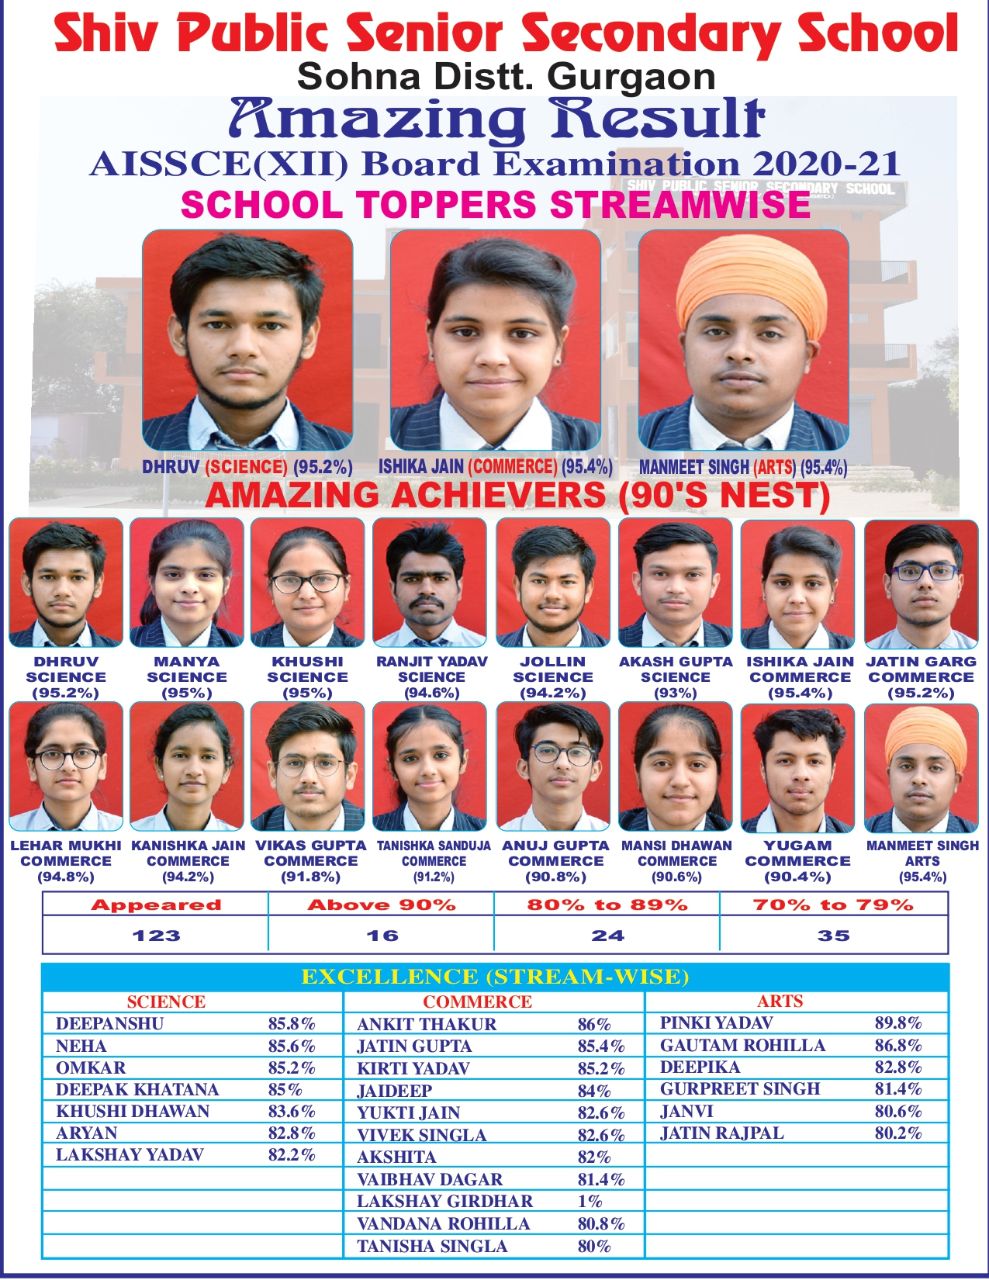 Toppers of Class XII for the 2020-21 session